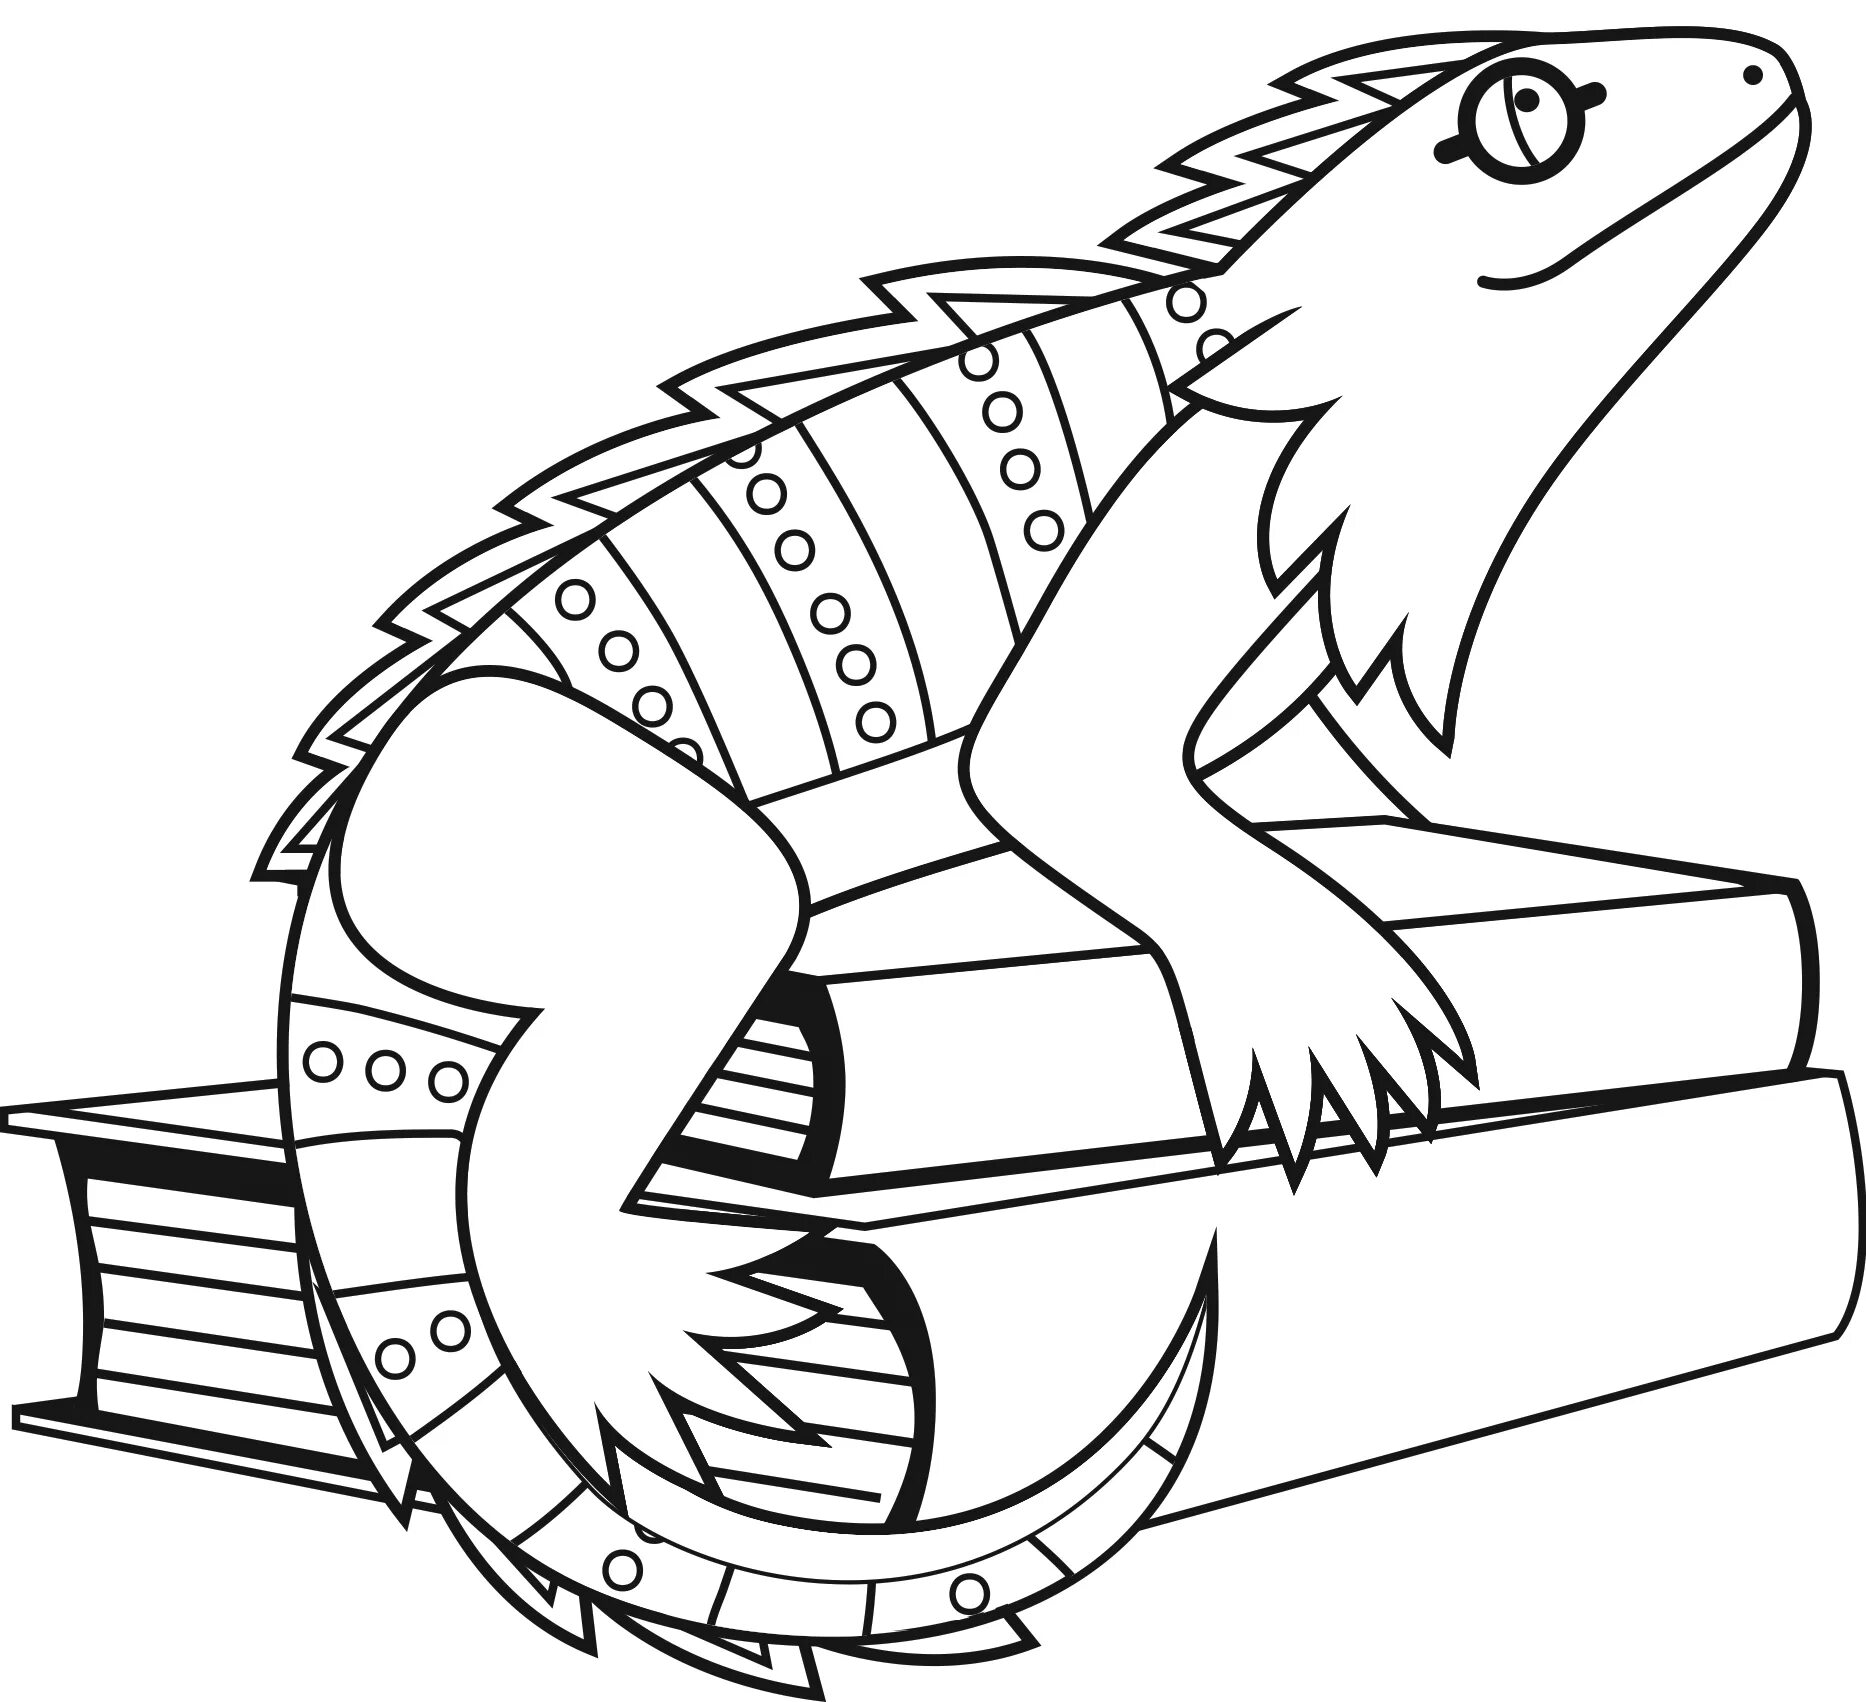 Greater bearded dragon coloring page